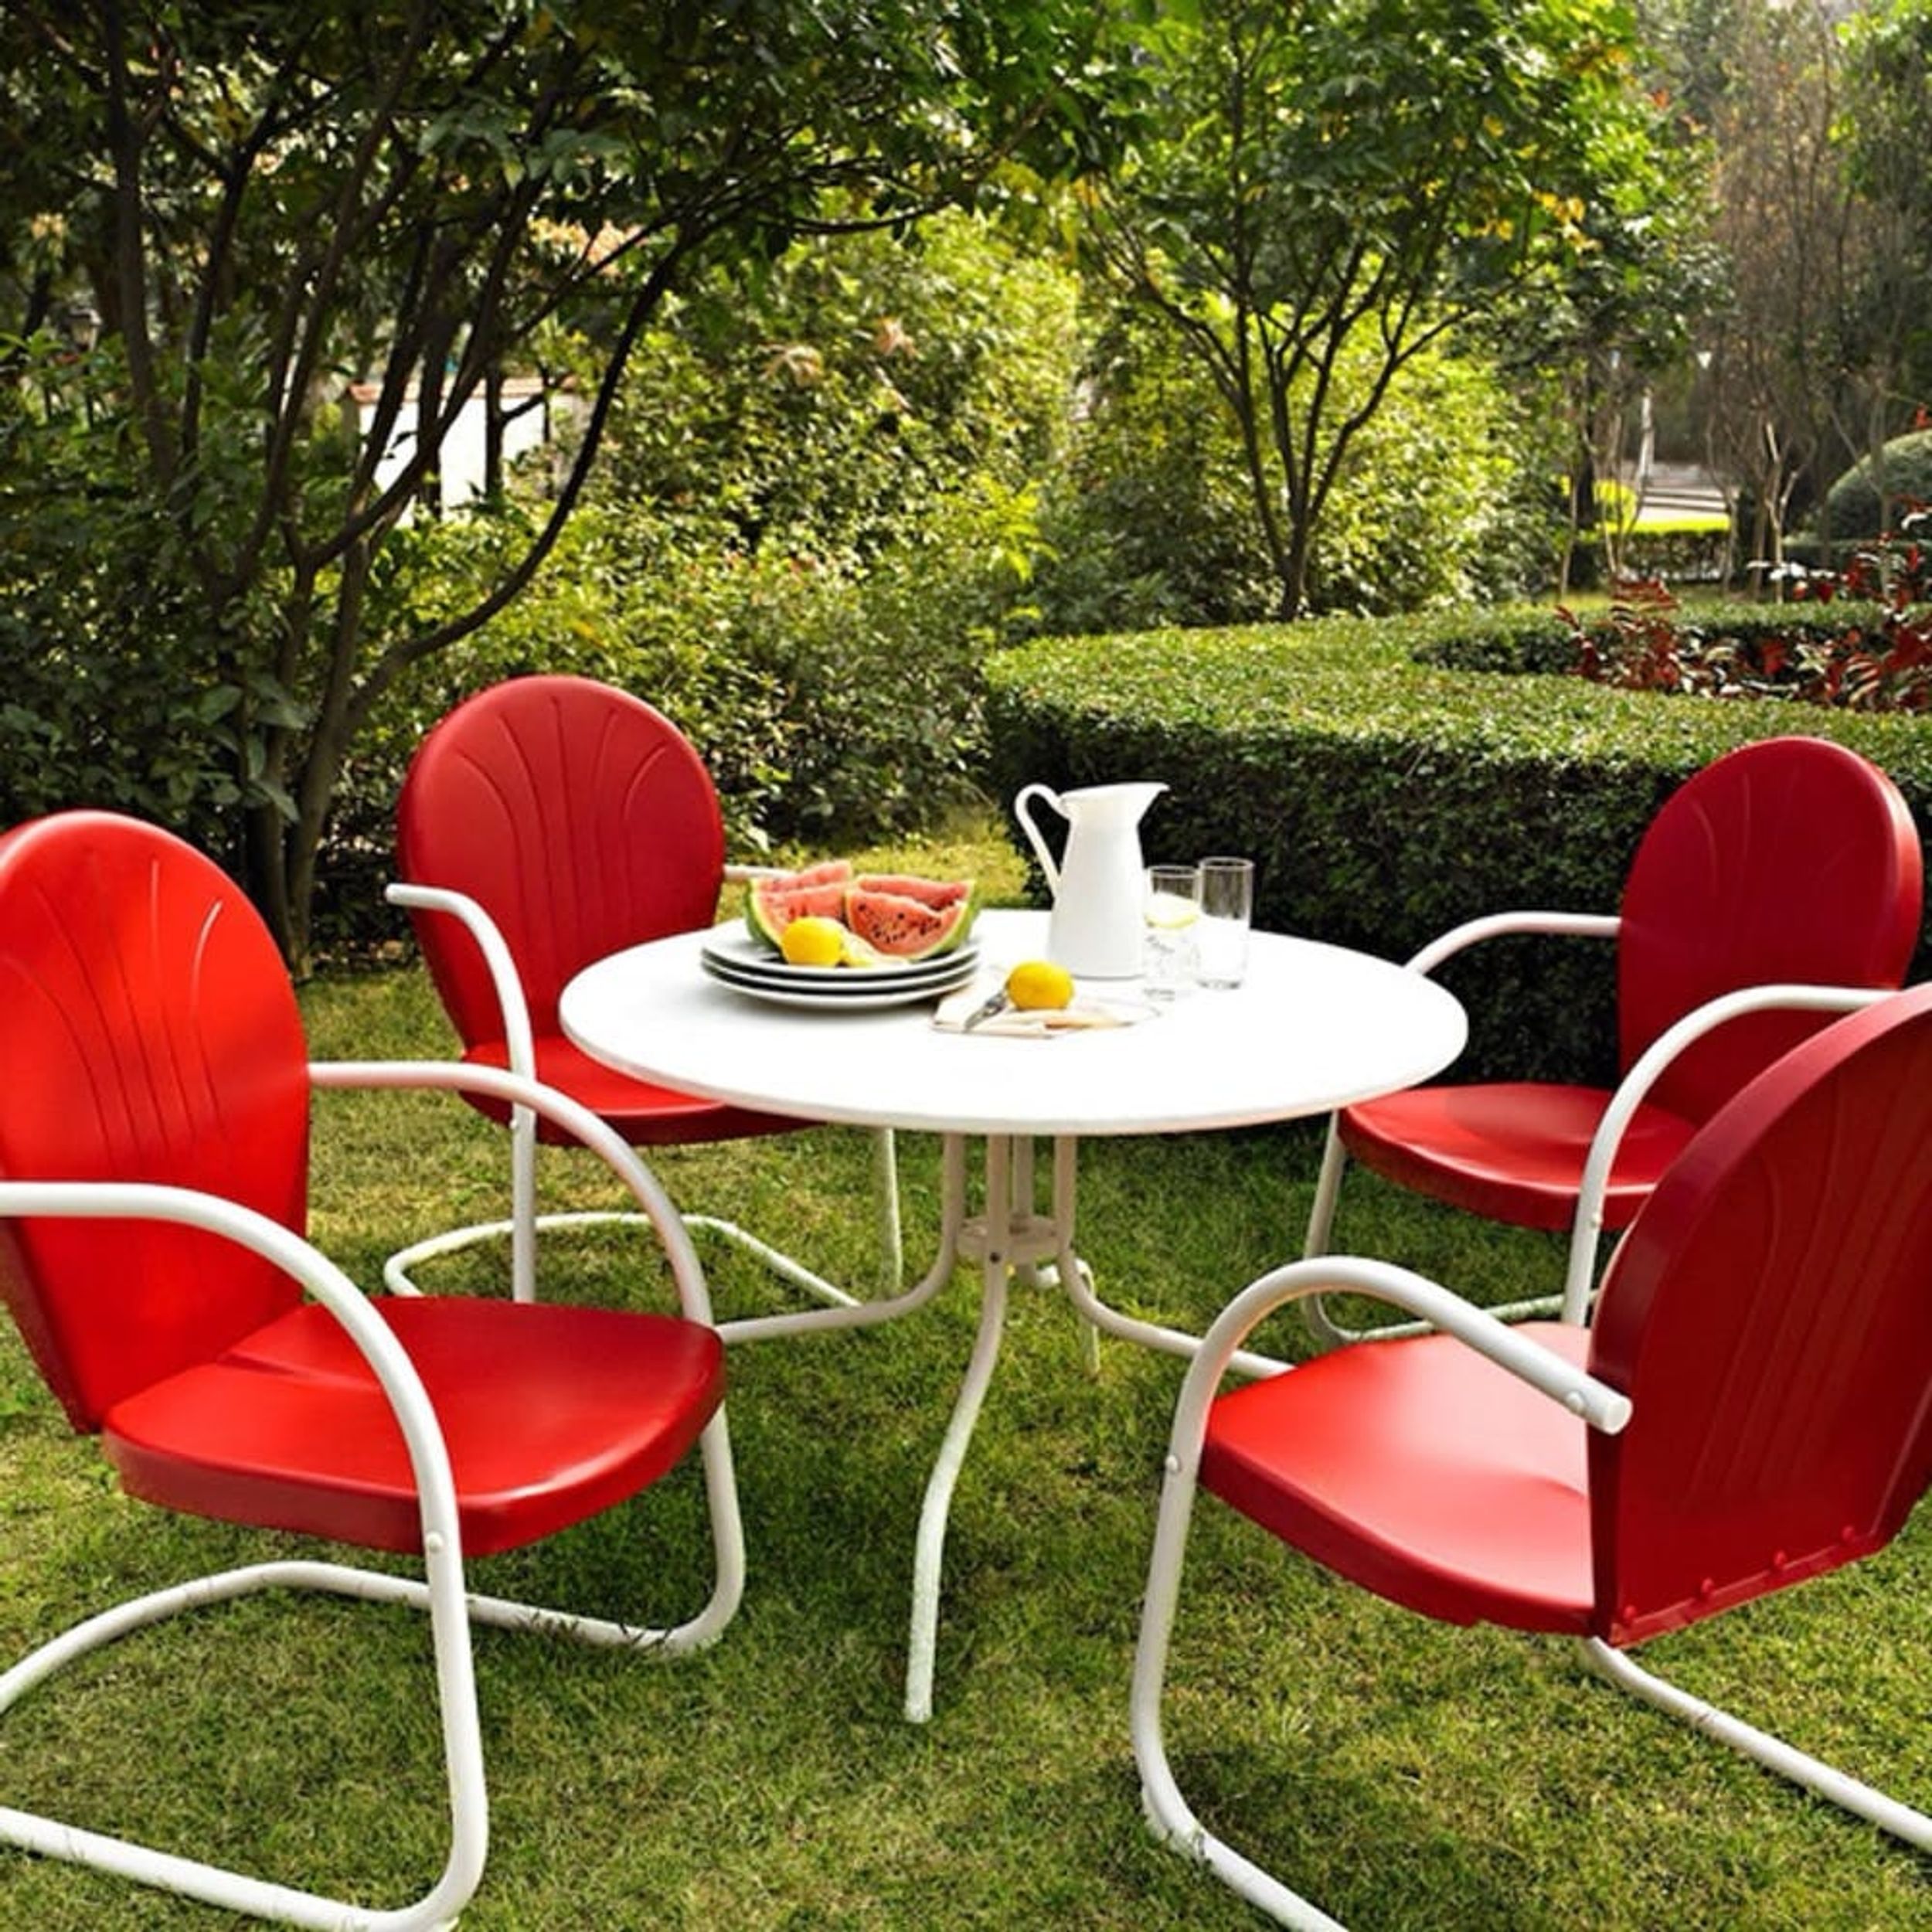 13 Outdoor Entertaining Finds at Kohl’s to Get You Set for Summer